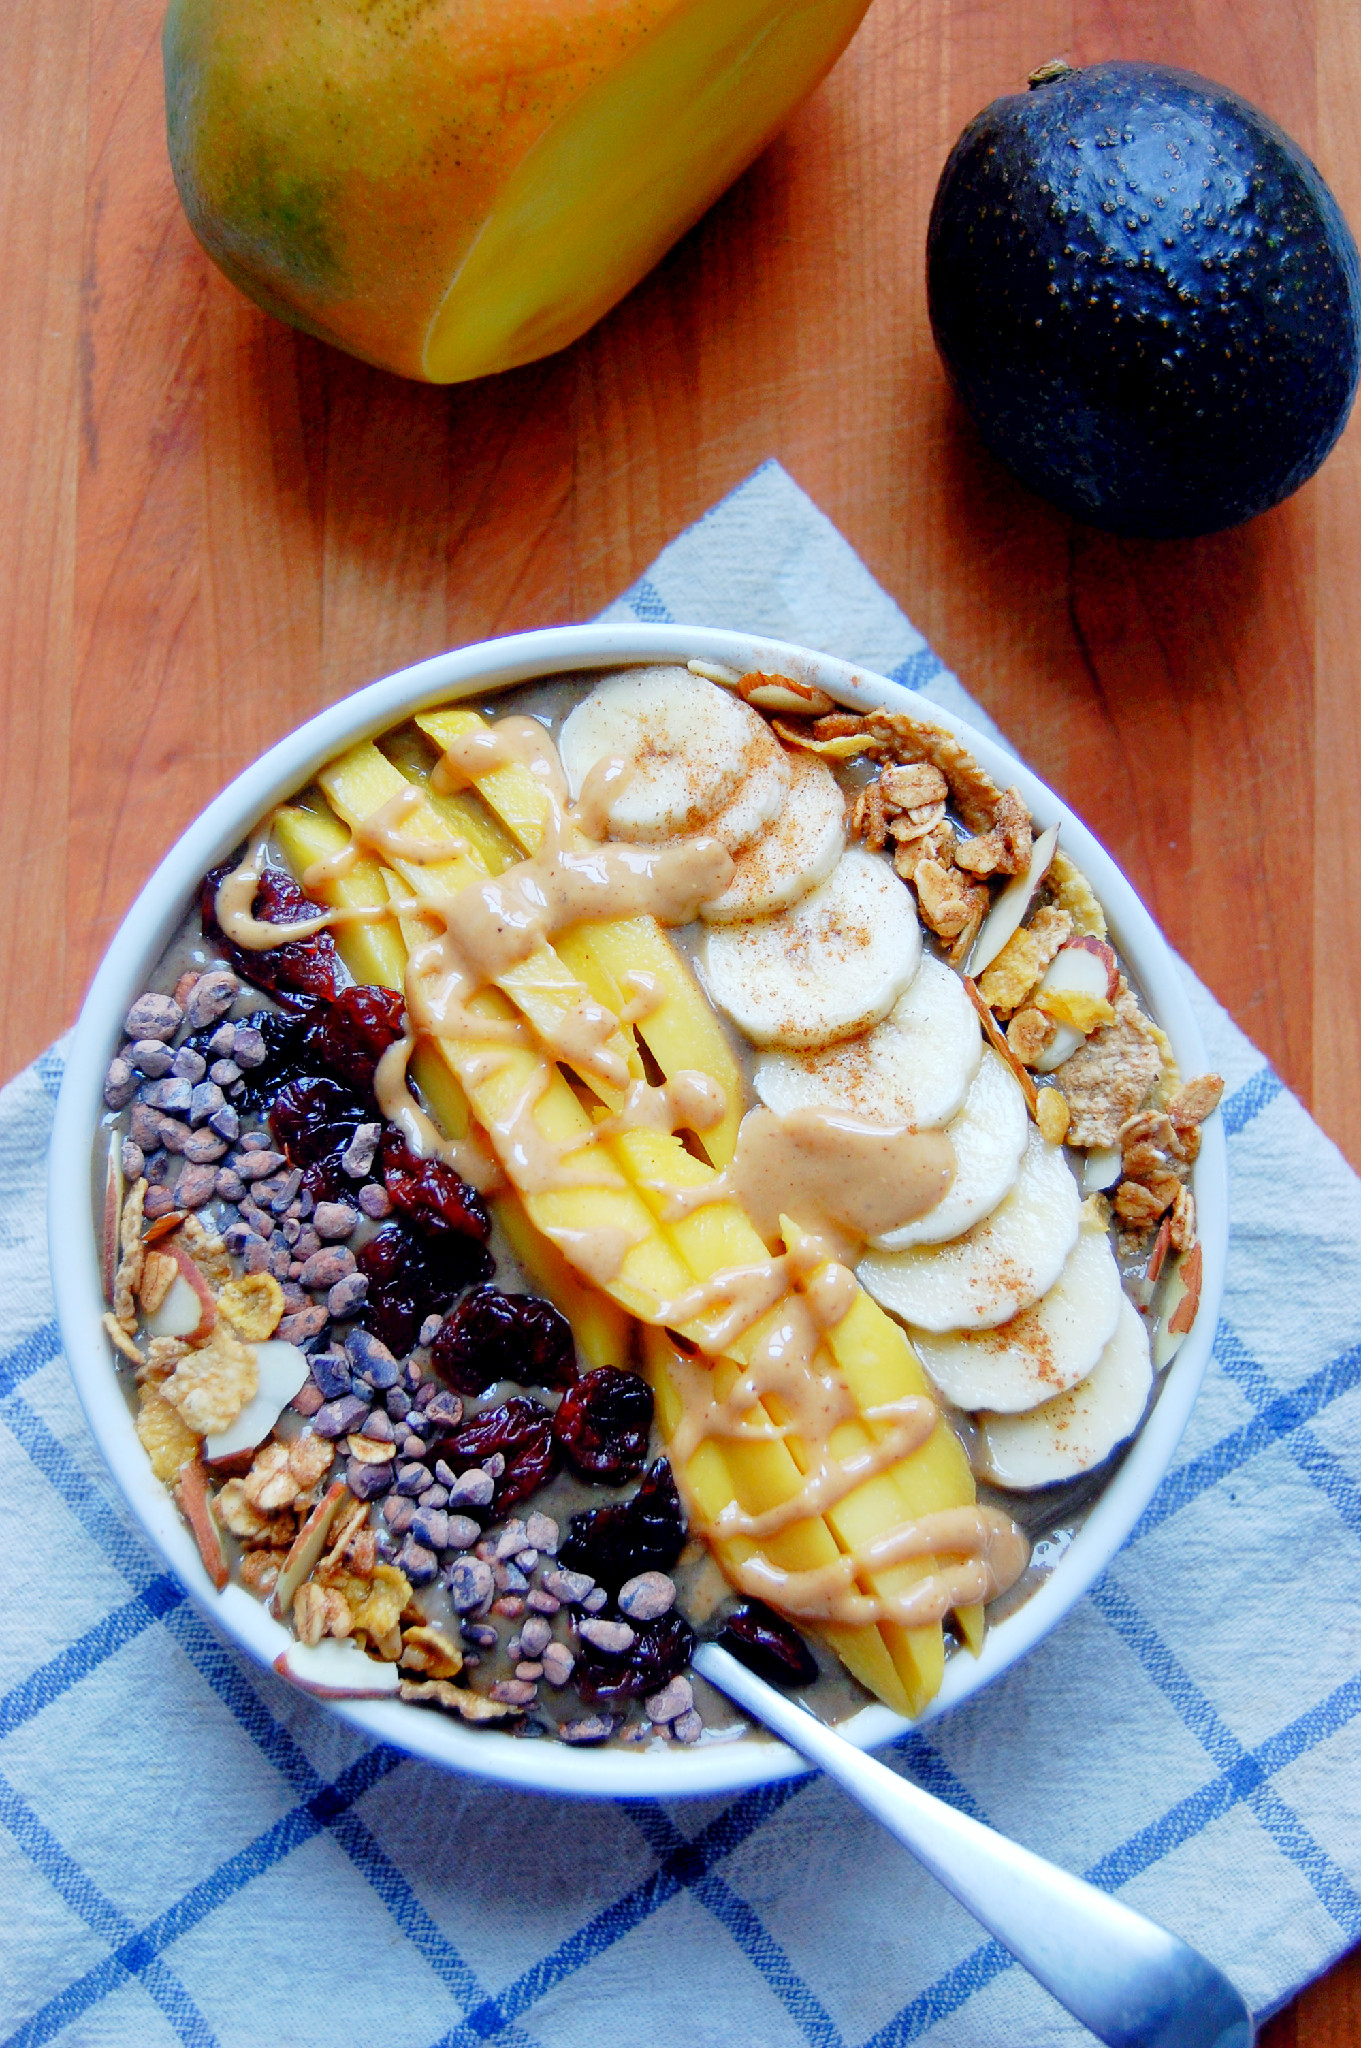 https://uprootkitchen.com/wp-content/uploads/2015/03/Mighty-Mango-Acai-Bowl-a-delicious-thick-fruit-smoothie-with-lots-of-antioxidant-power-Uproot-from-Oregon.jpg